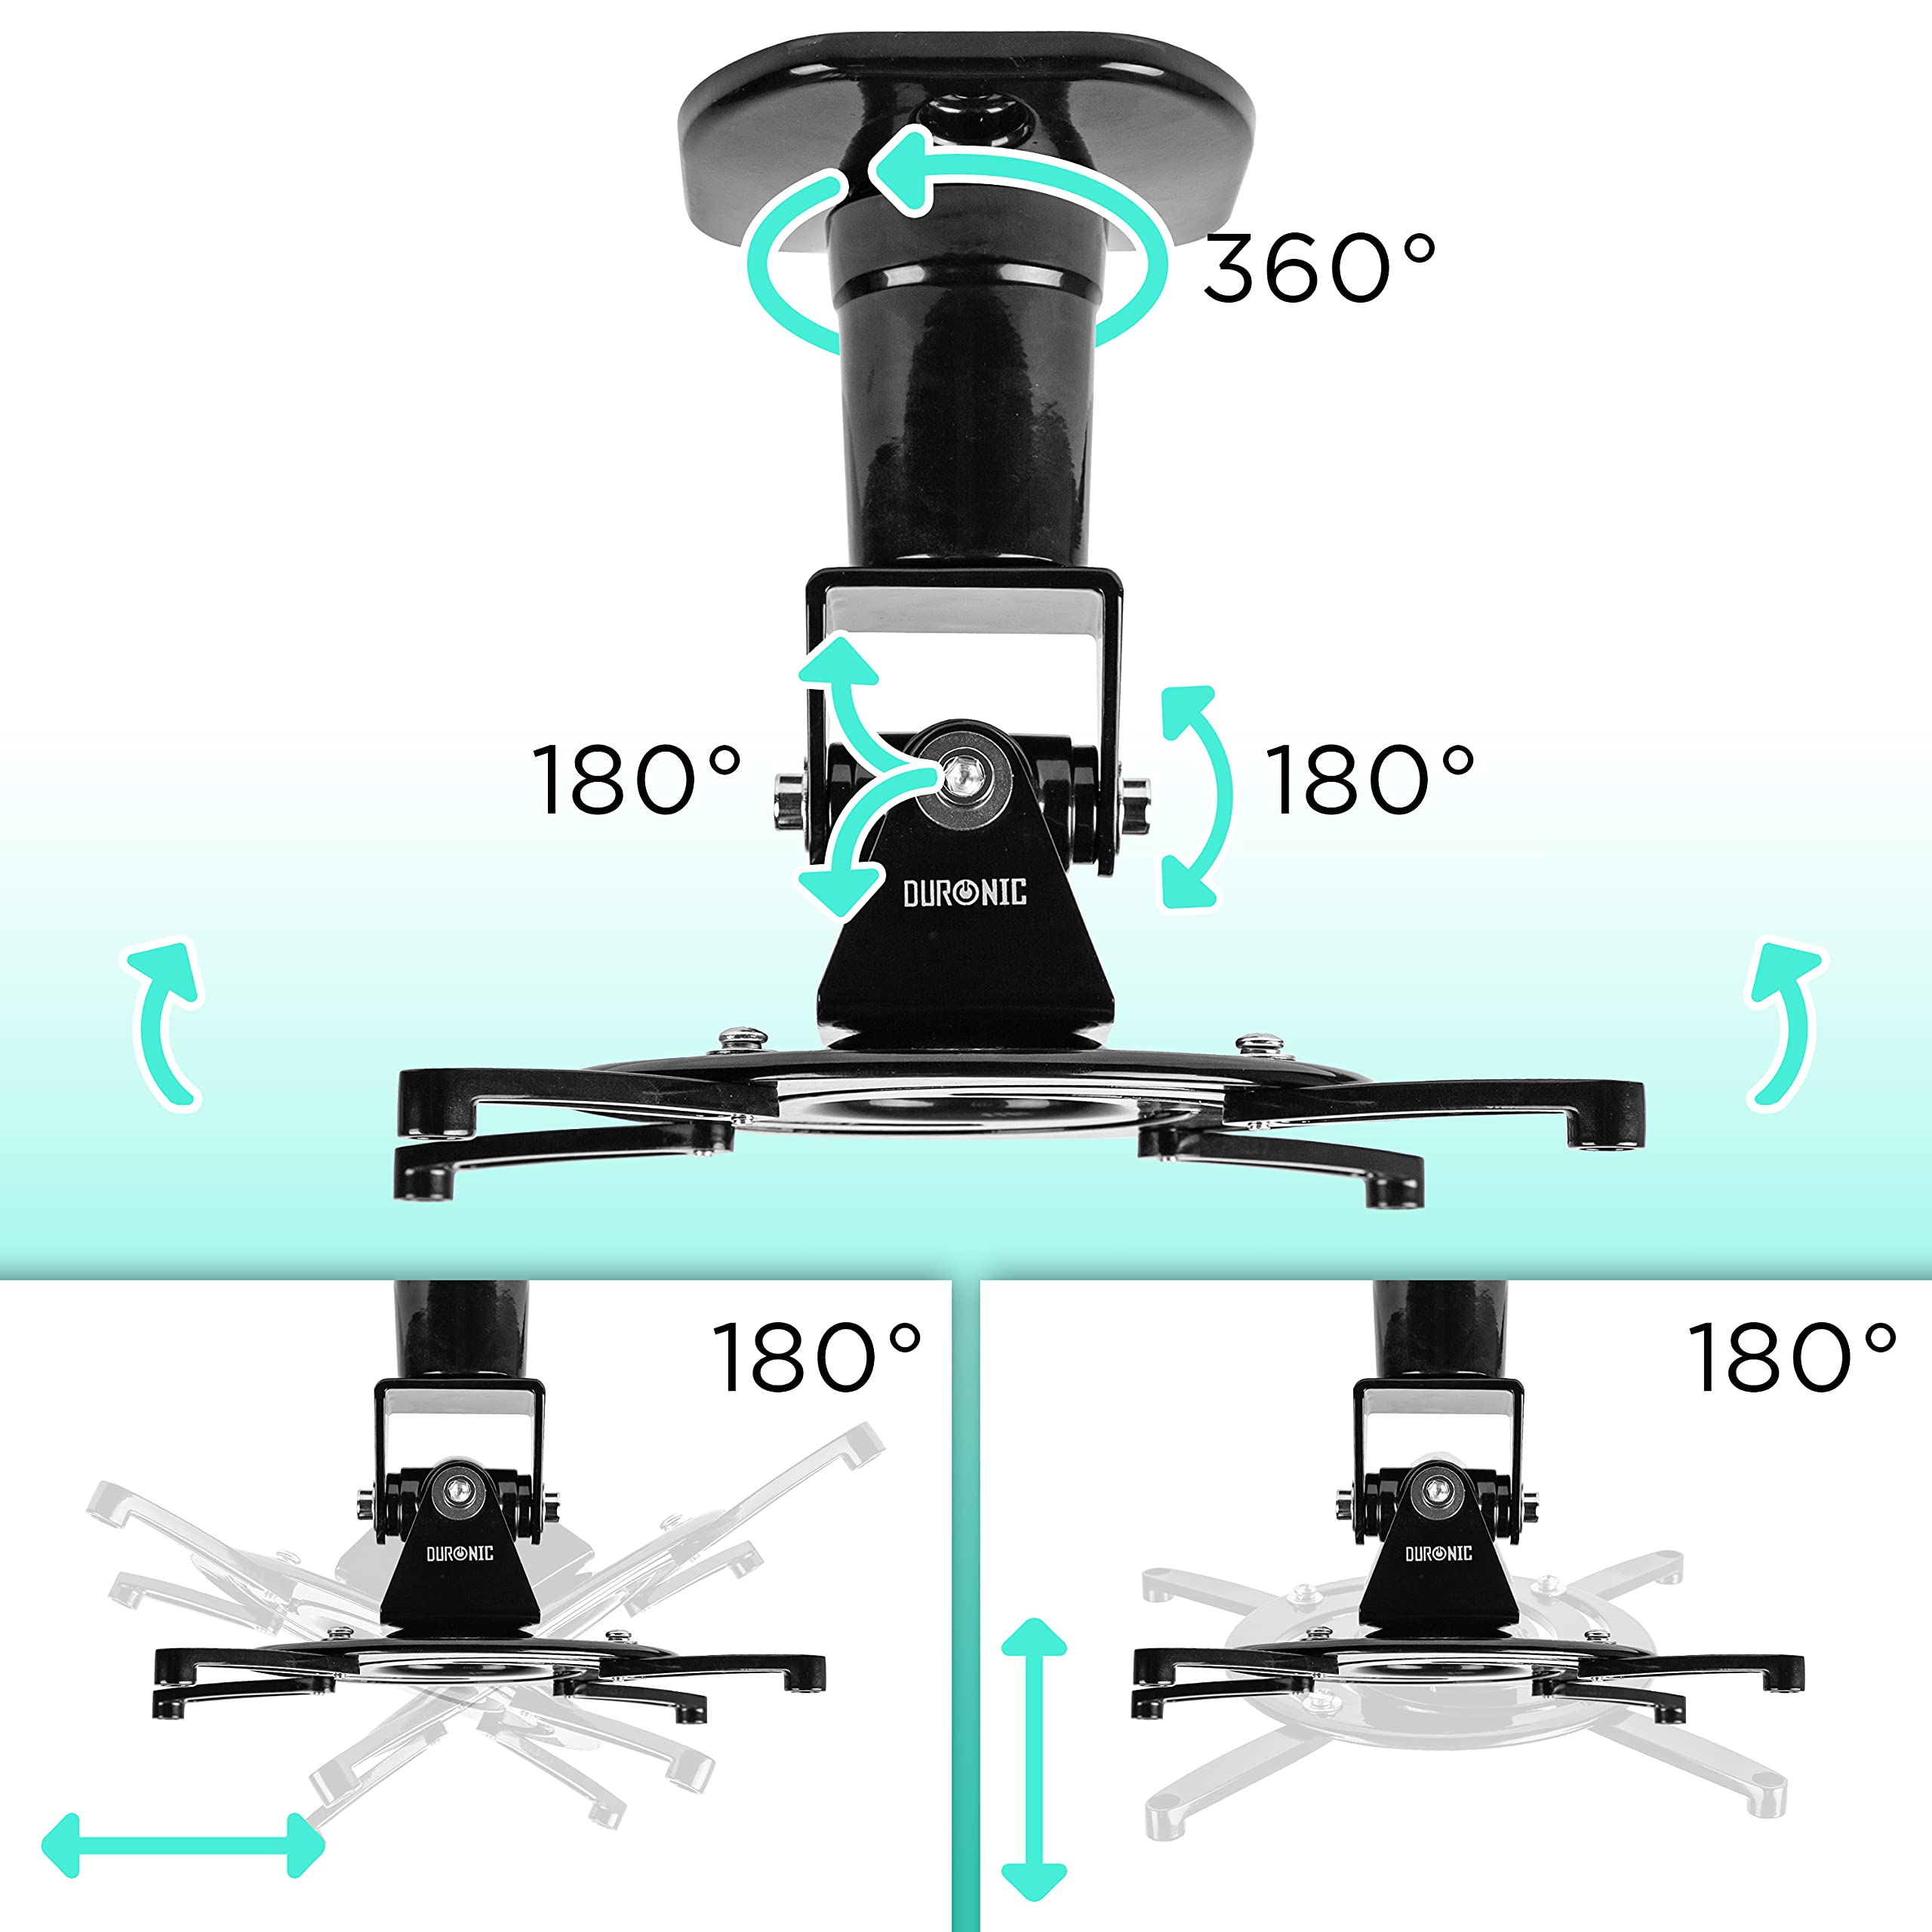 Duronic Projector Mount PB03XB | Bracket Fixing for Ceiling | 13.6kg Capacity | Universal | Heavy Duty | Fittings Included | Rotate 306 °, Swivel 40 °, Tilt 60° for Easy Projection Set-Up